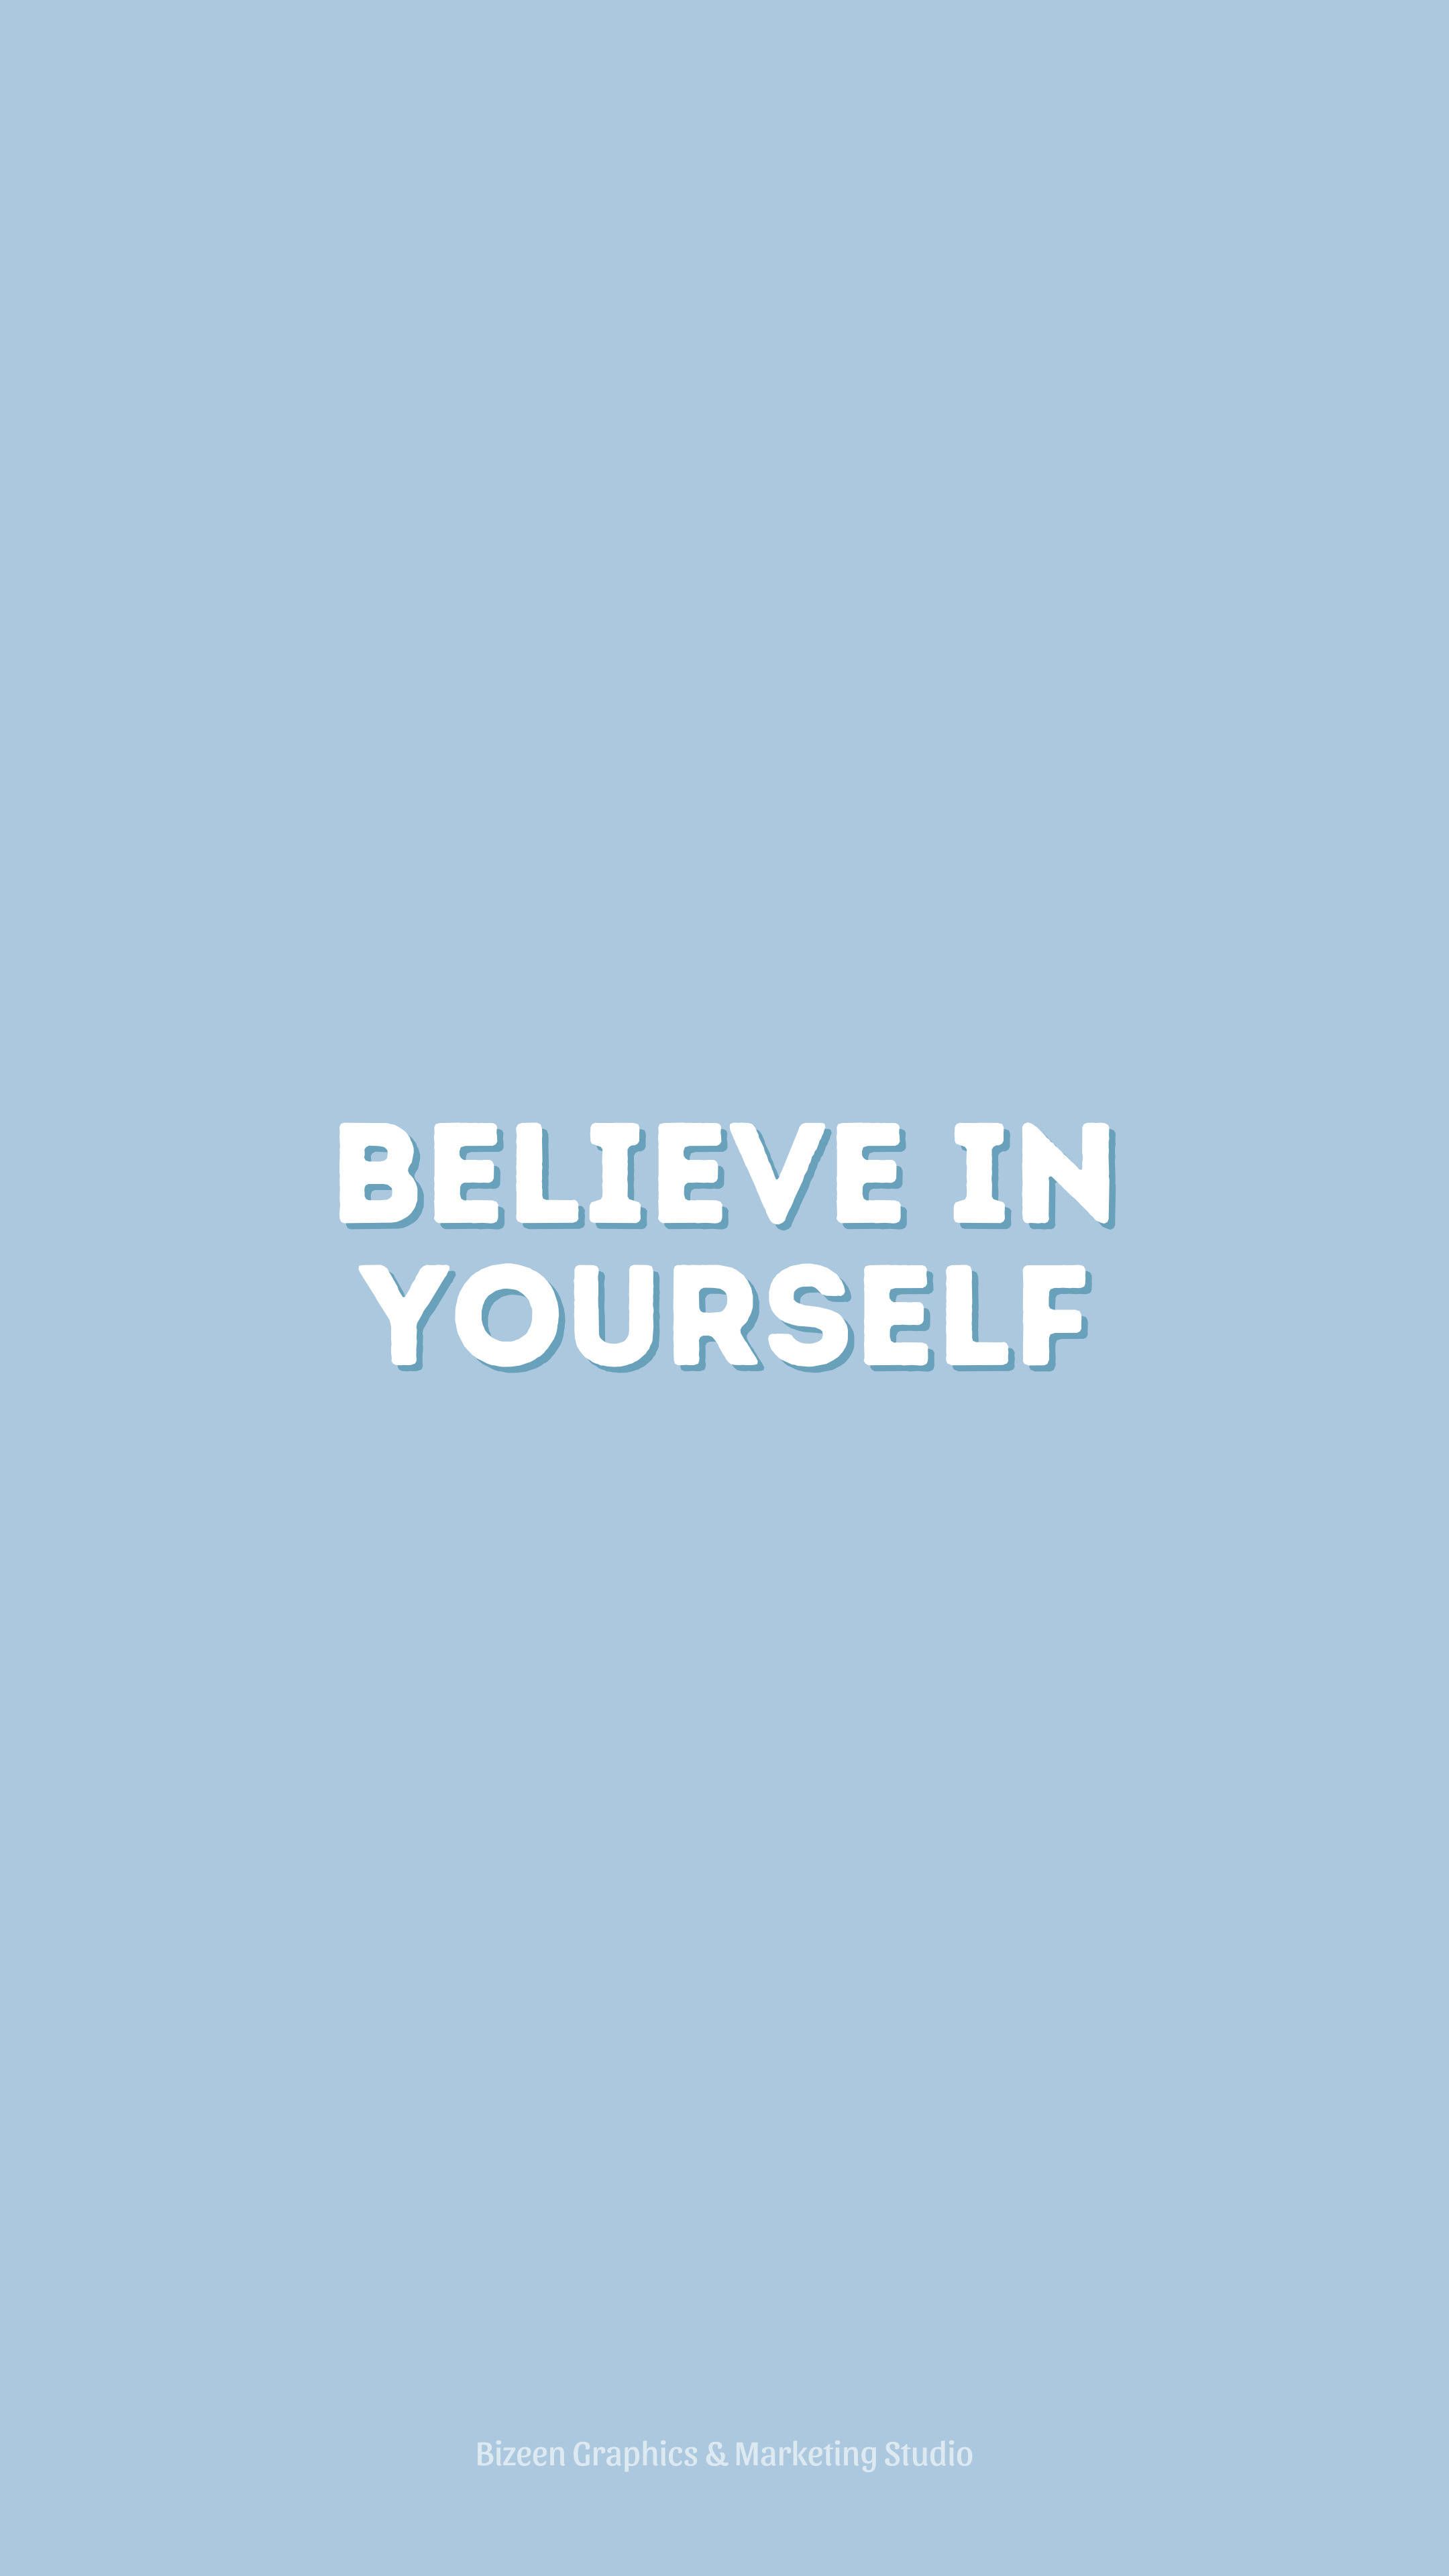 Believe in yourself poster - Pastel